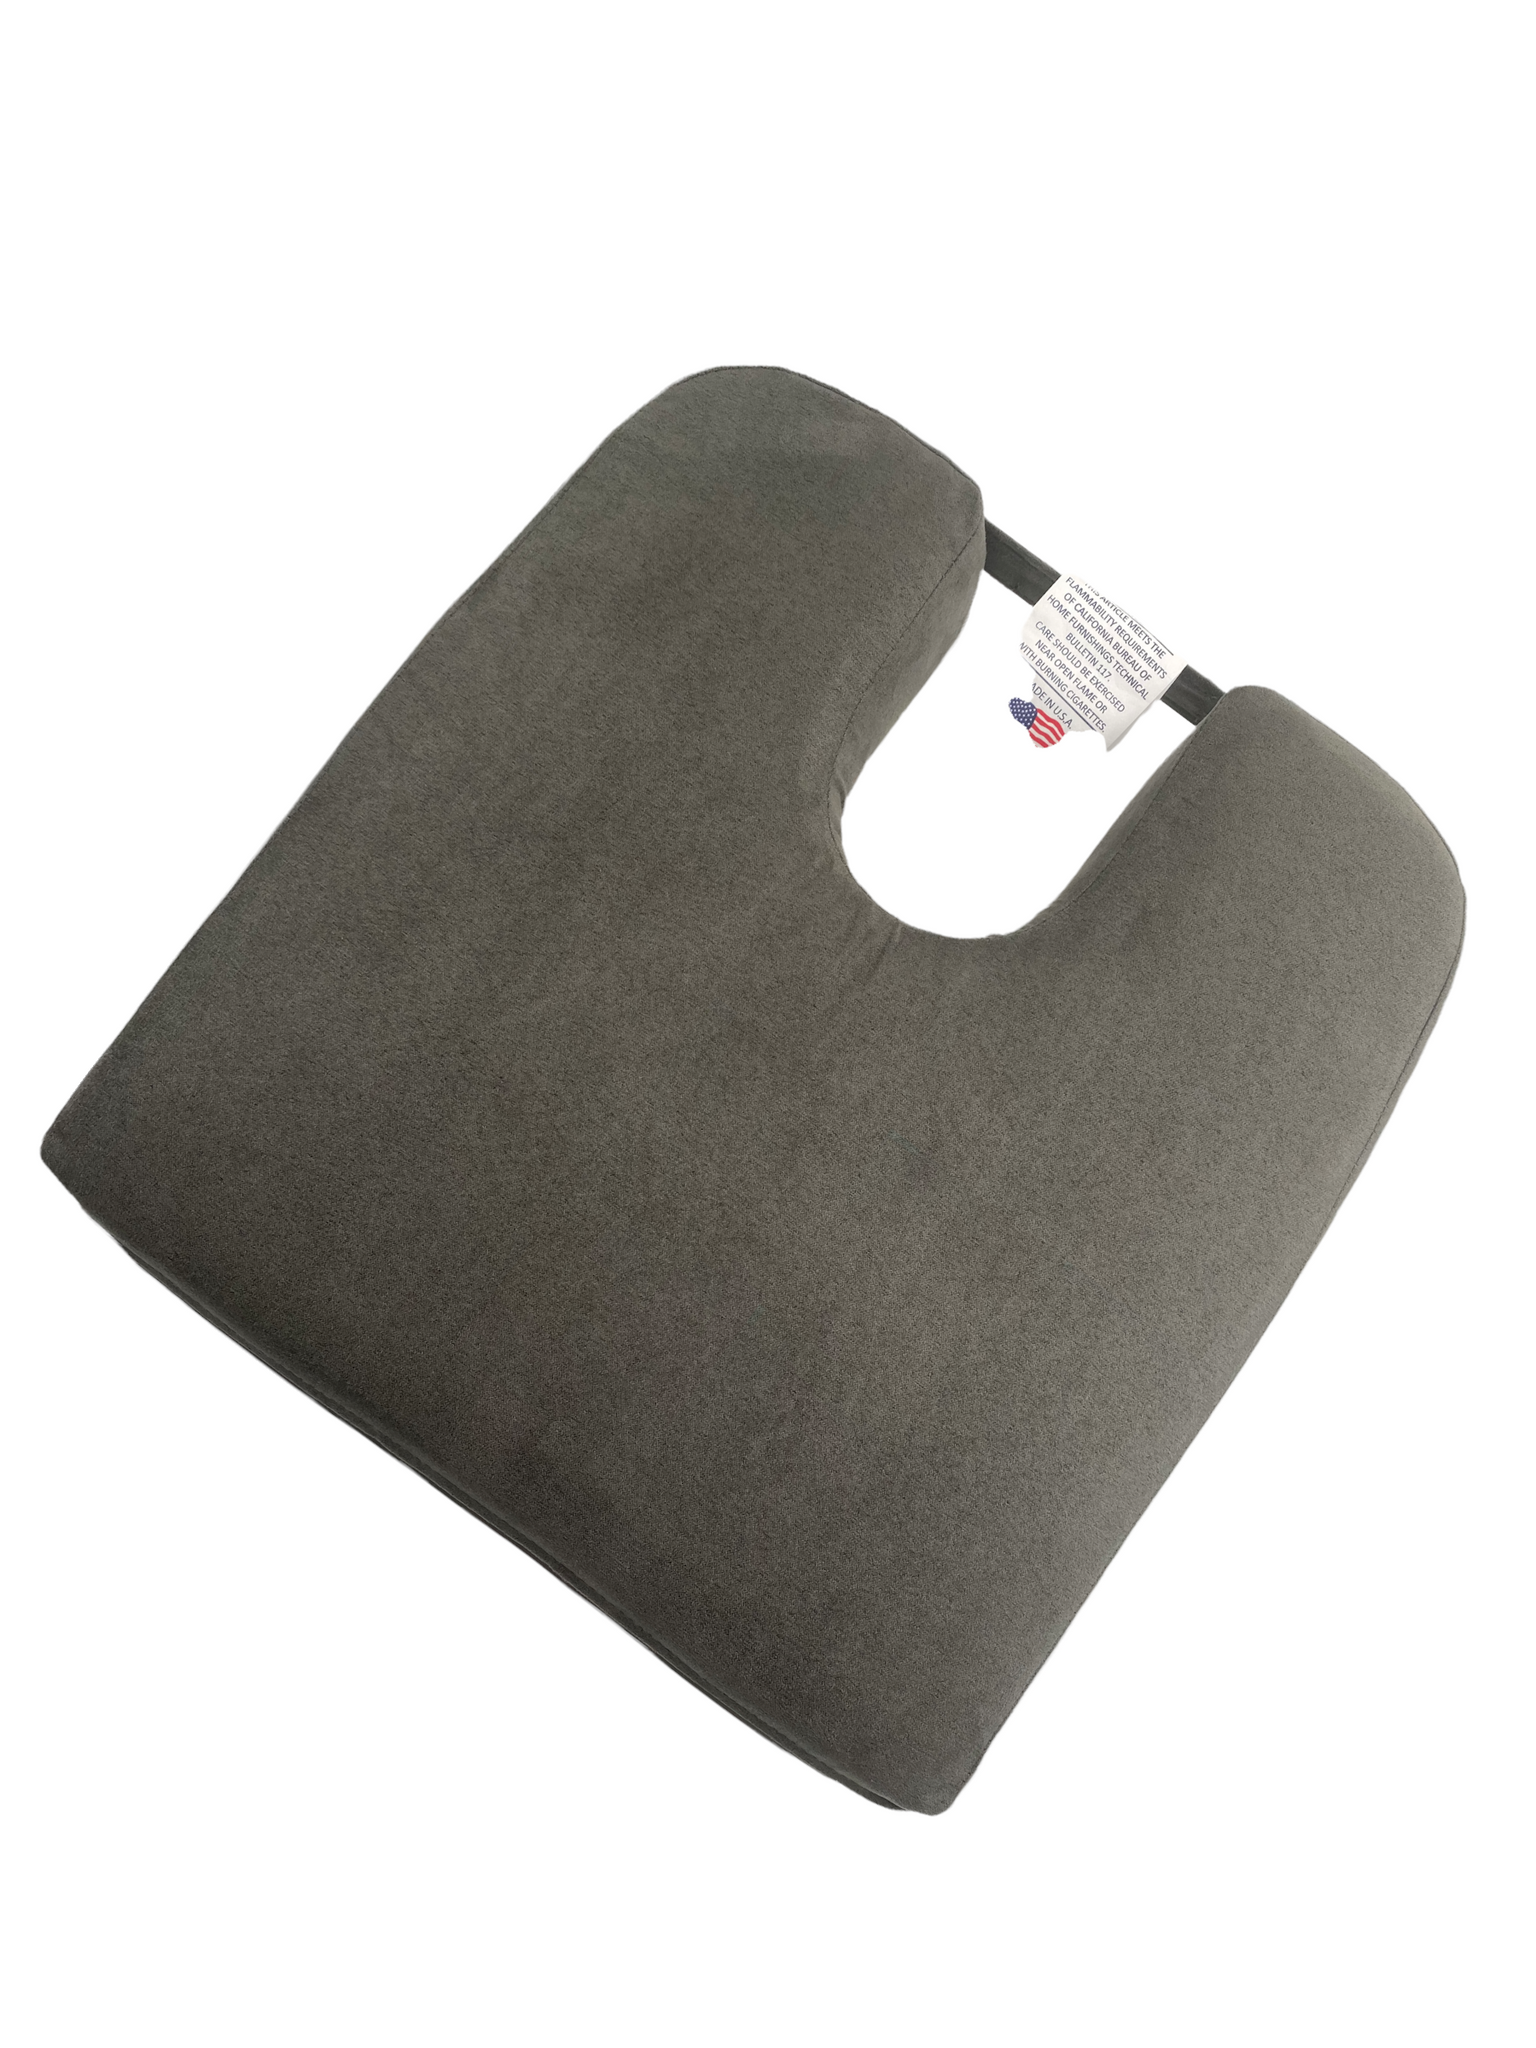 Special Needs Therapy Seat Cushion | Lean-N-Learn Wedge Cushion